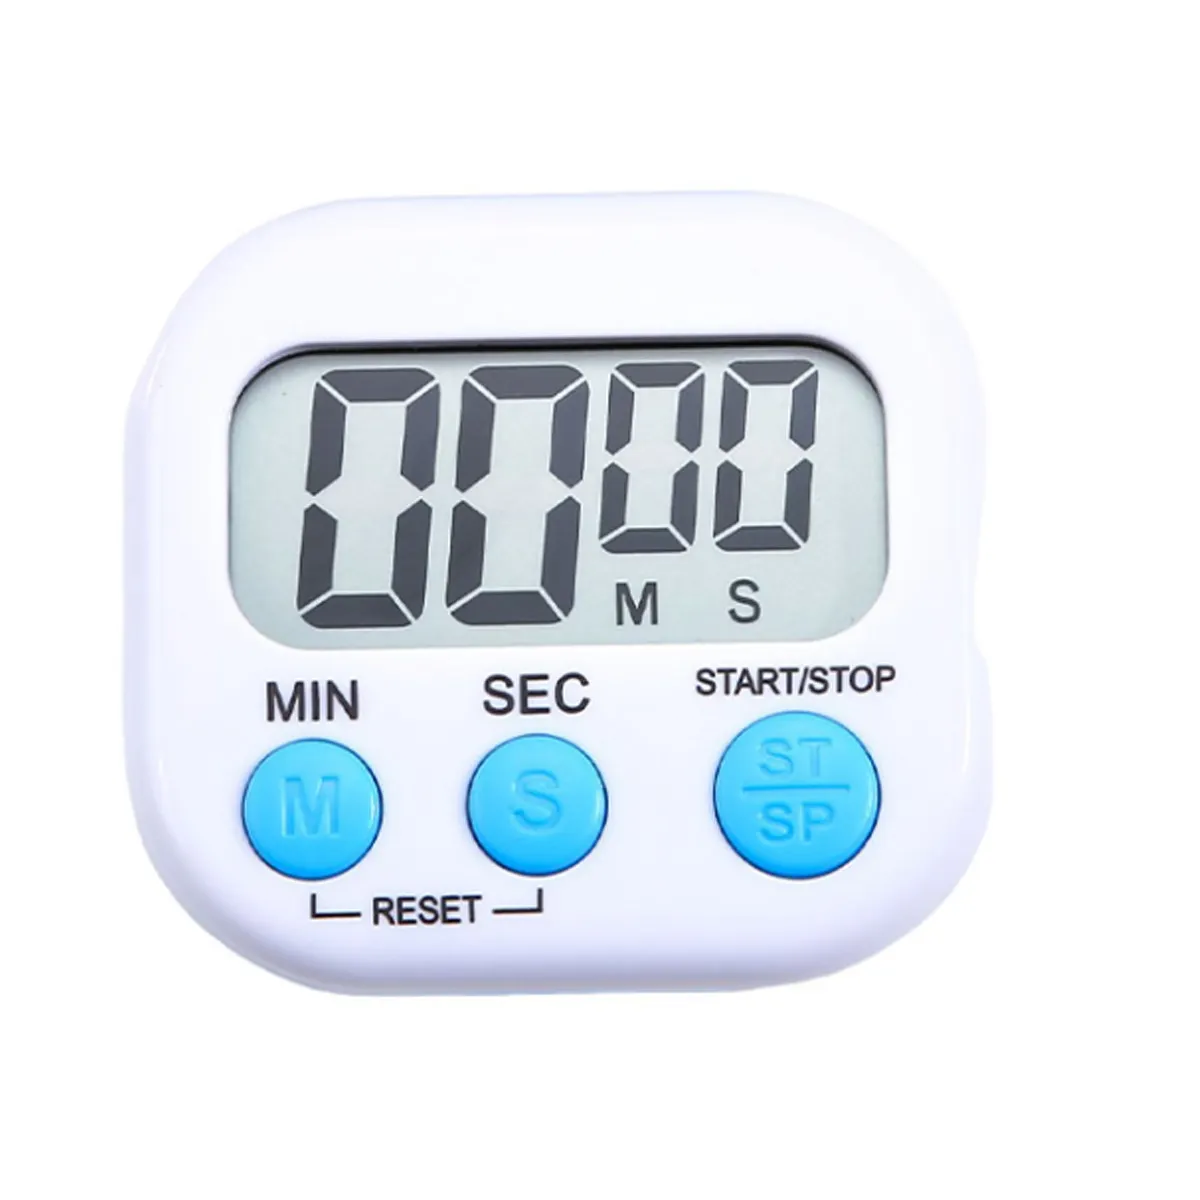 1 Stop Shopping Classroom Countdown Timers For Teachers Kids Large Screen Home Cooking Magnetic Kitchen Timers Digital Timer